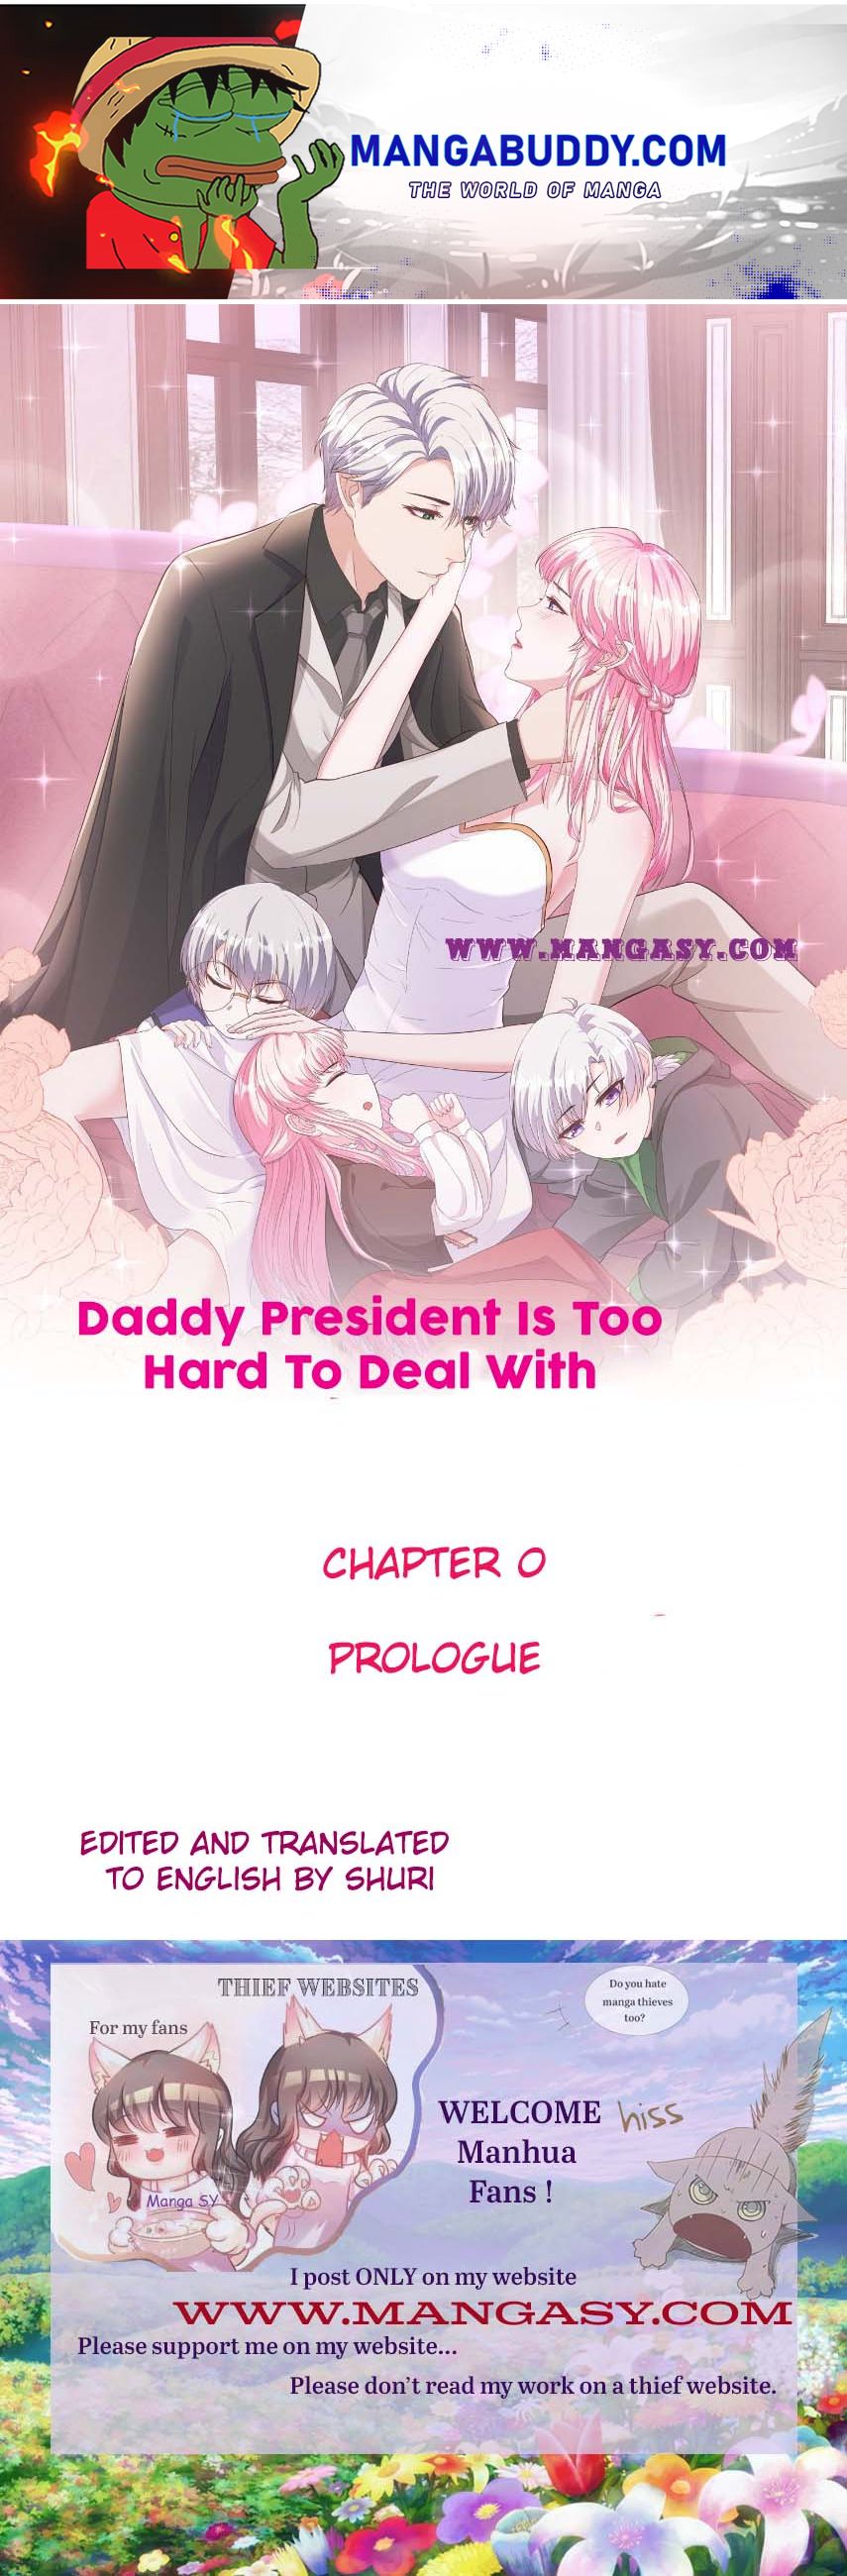 Daddy President Is Too Hard To Deal With - Page 1